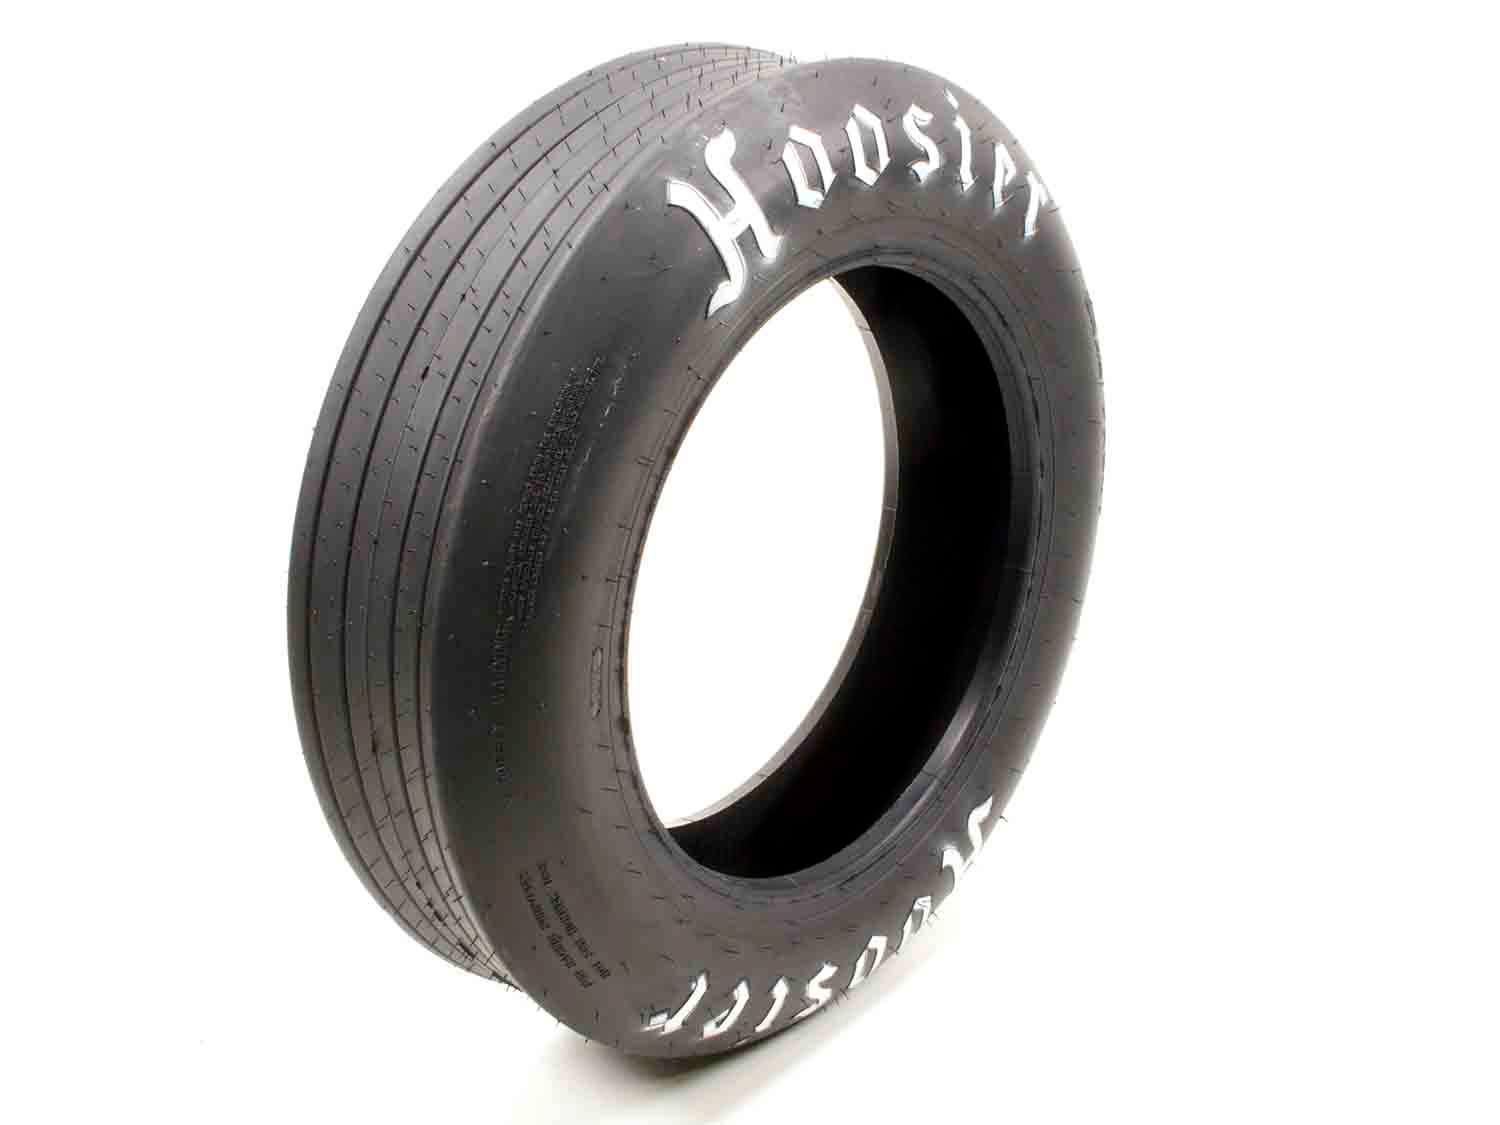 Drag Racing 23.0/5.0-15 FRONT TIRE